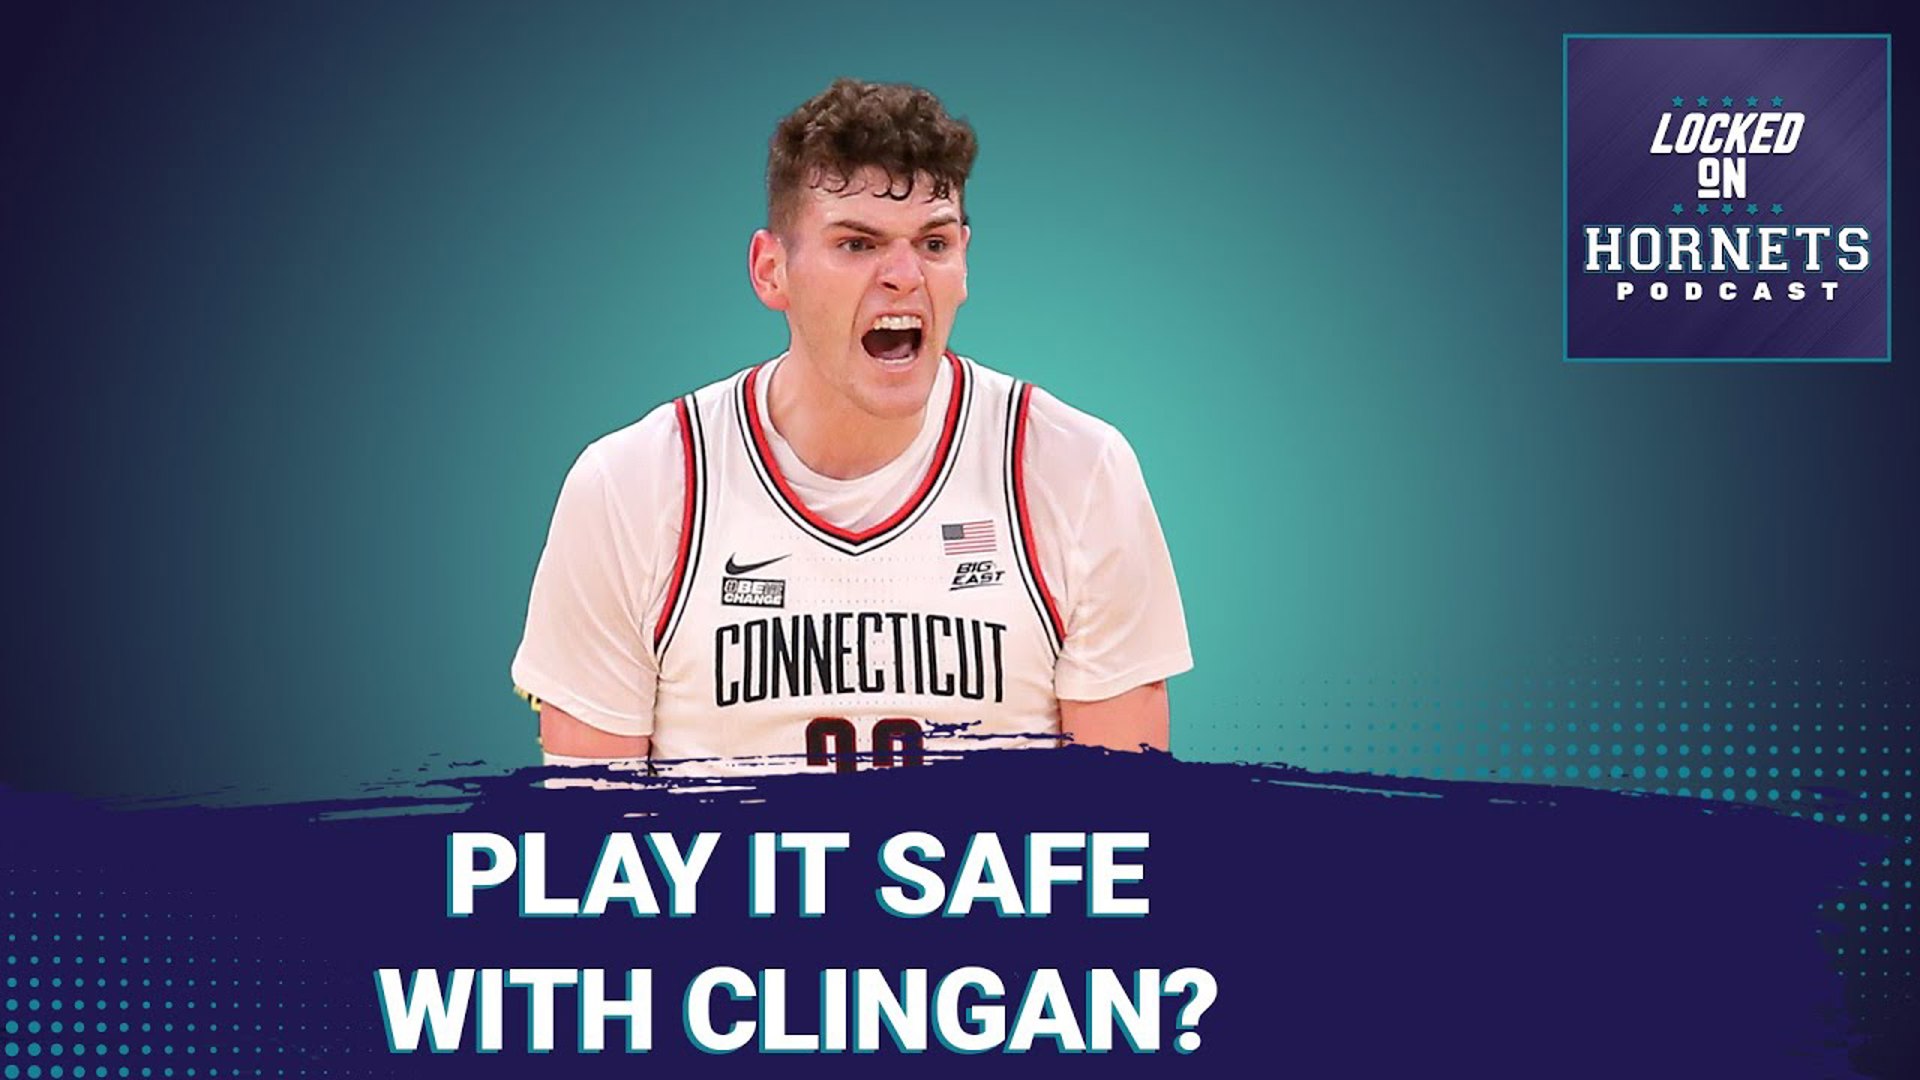 NBA Draft Scouting: Play it safe with Clingan, Hot prospects if the Charlotte Hornets trade back